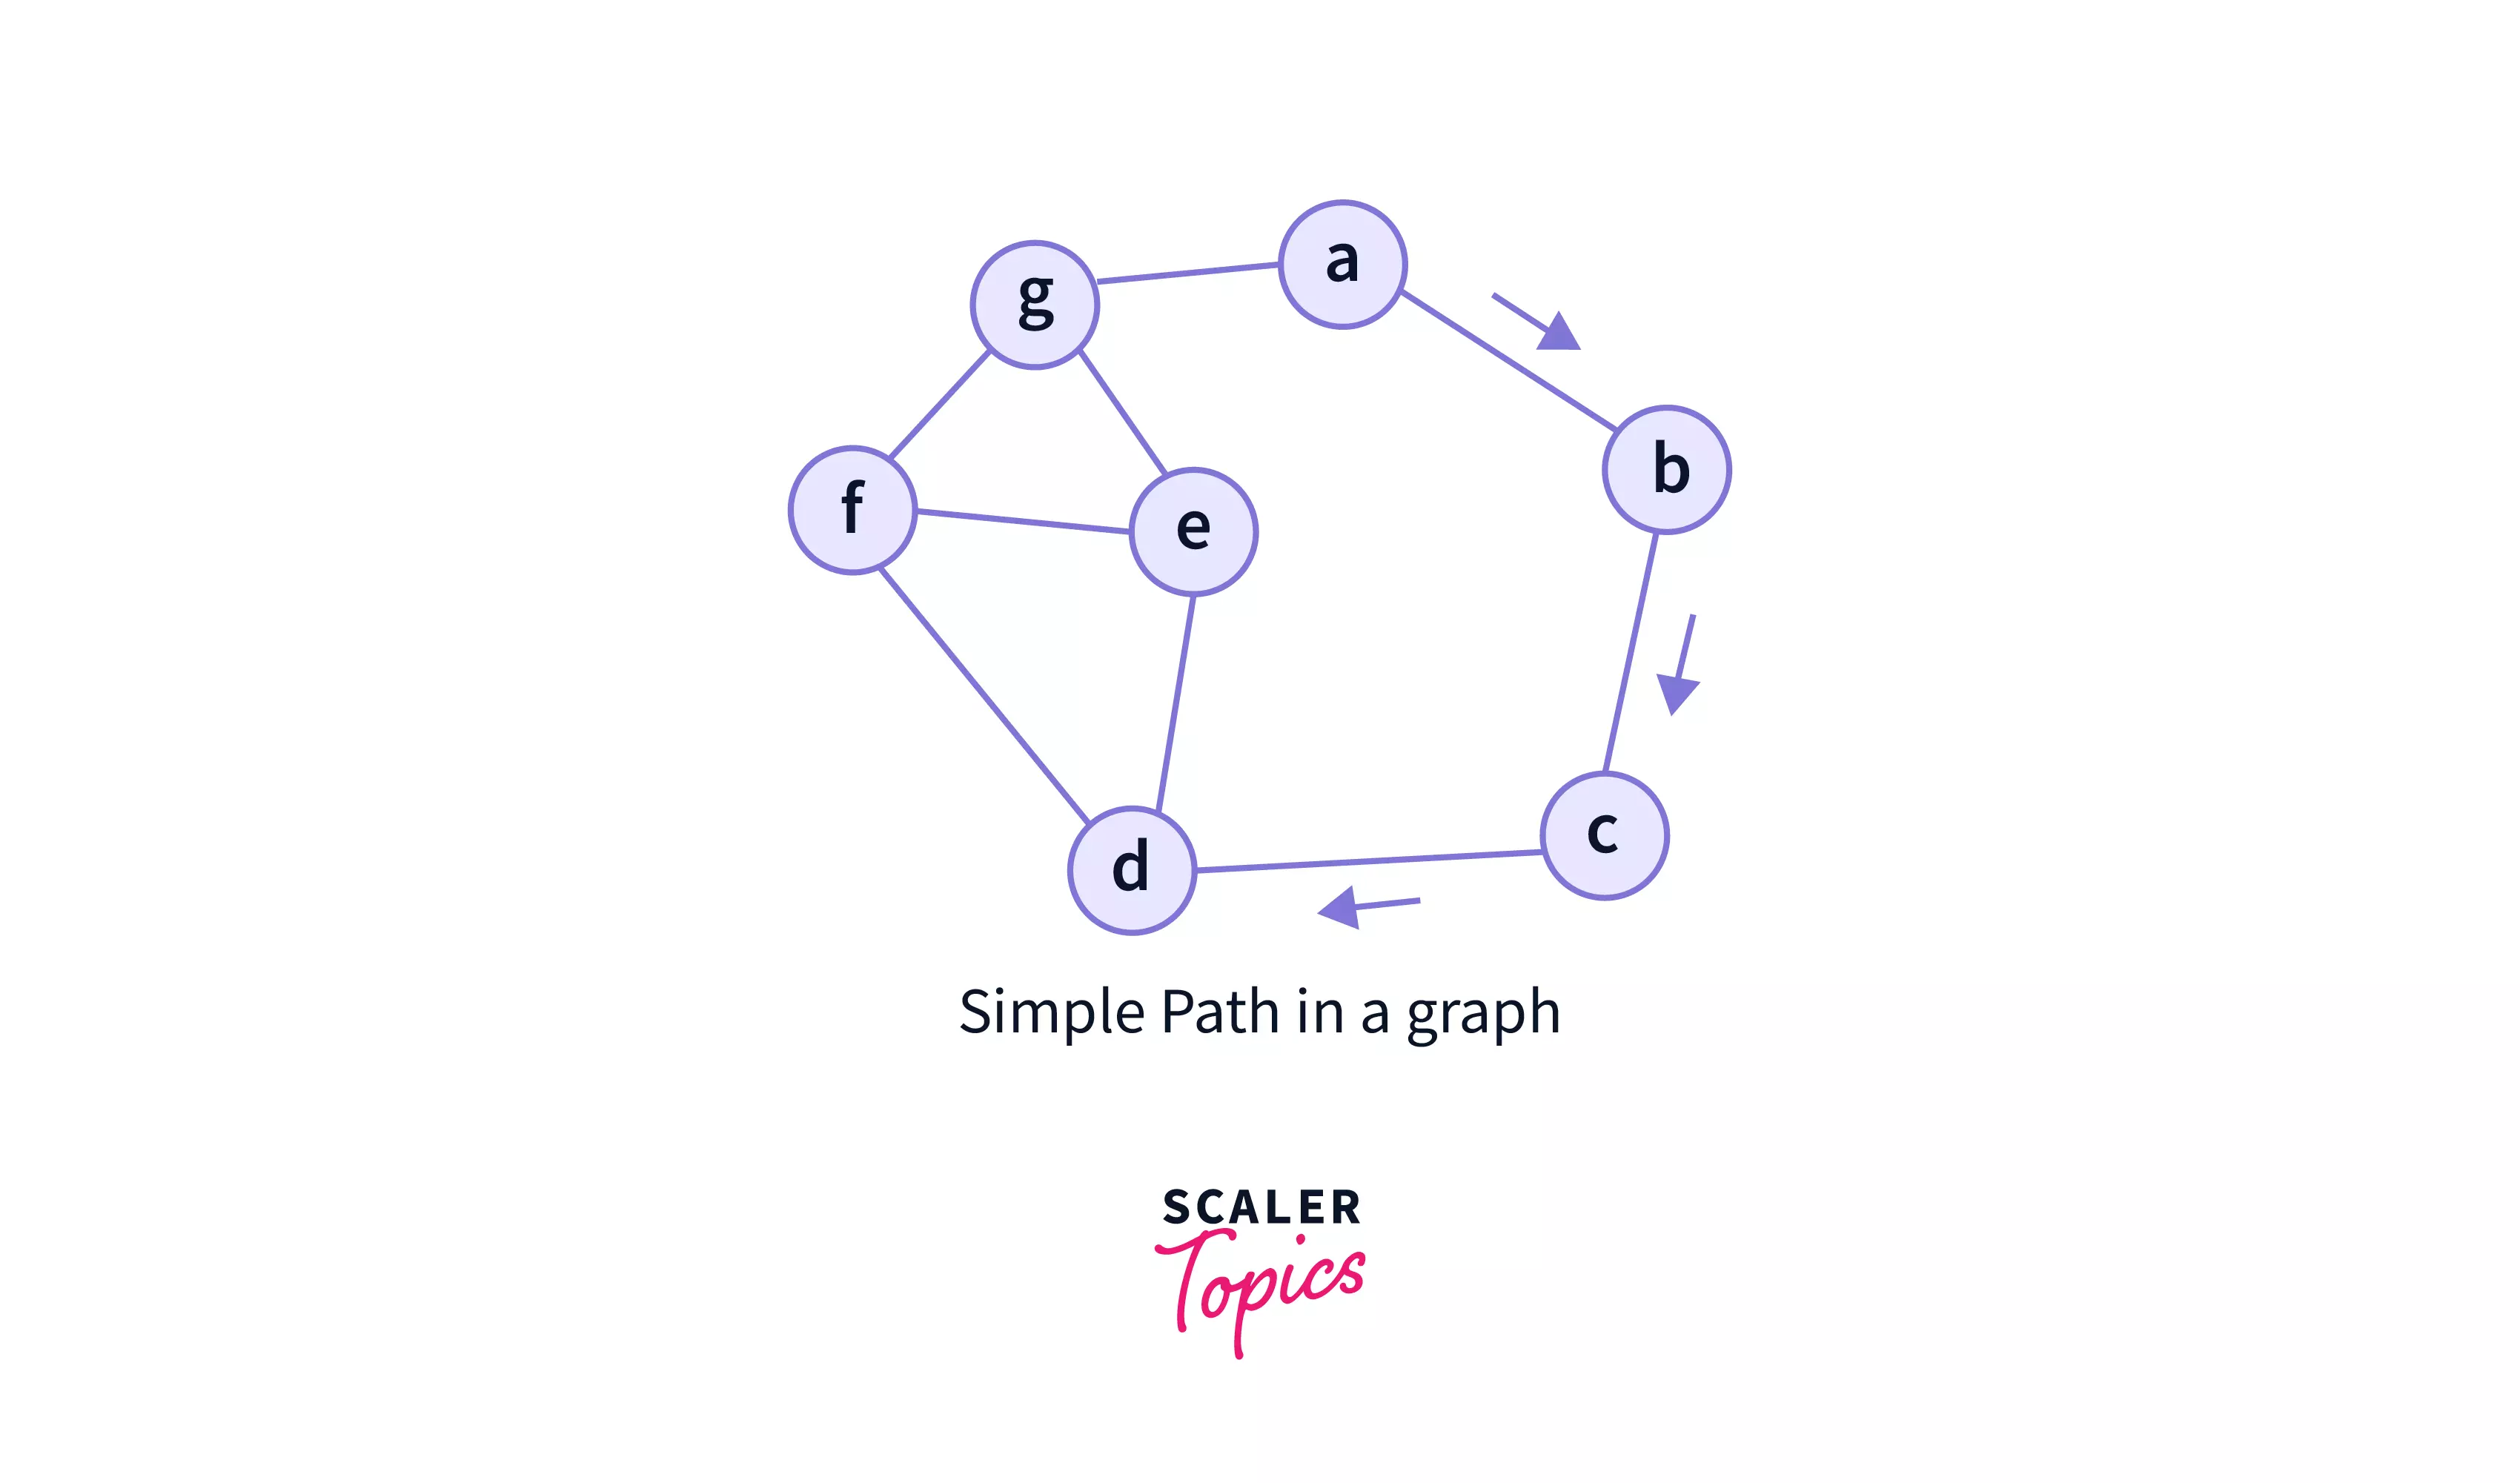 Simple Path in a graph